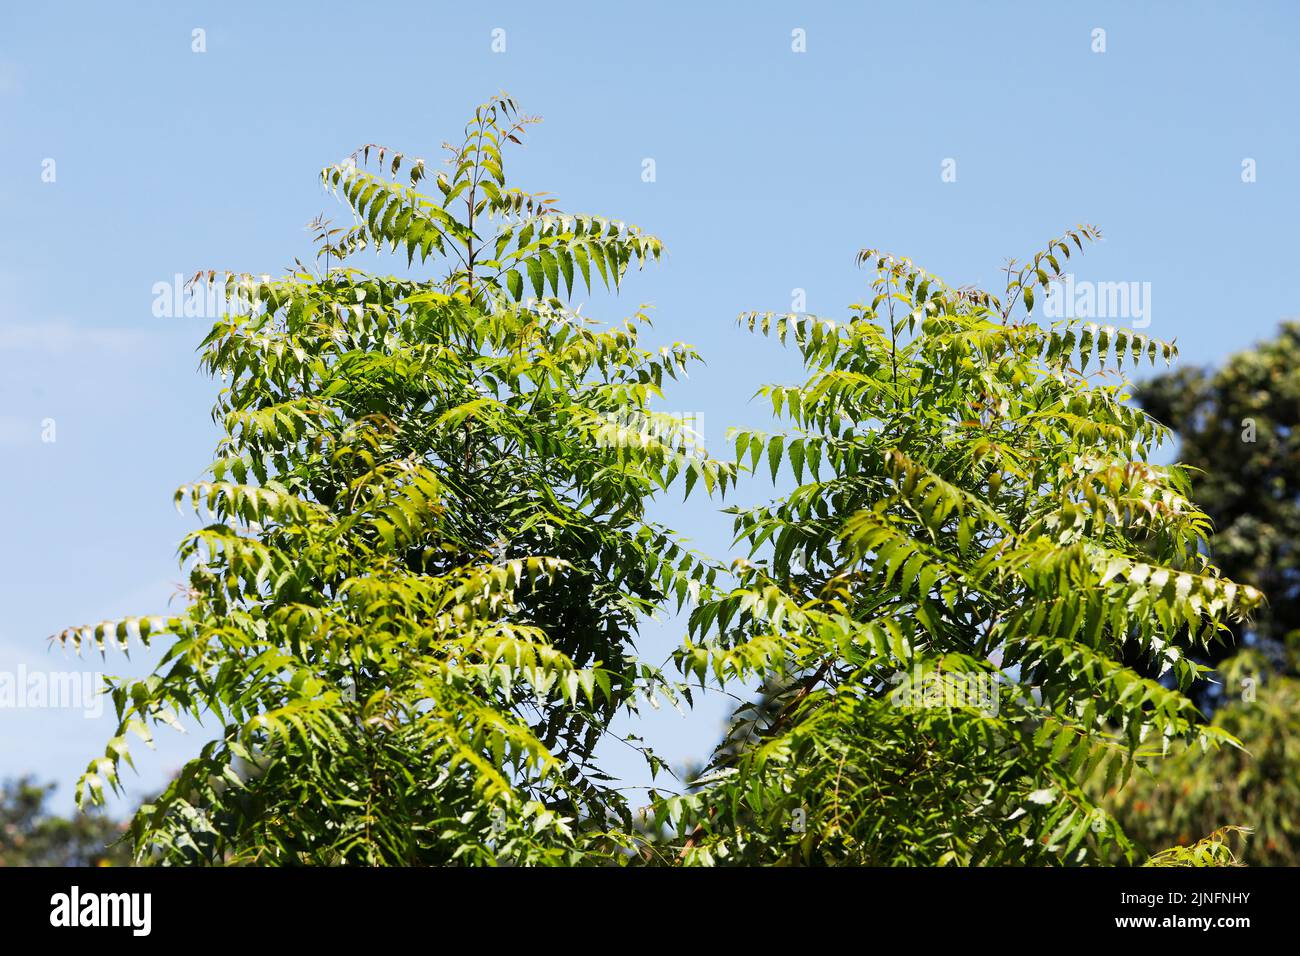 Dhaka, Bangladesh - August 11, 2022: Azadirachta indica, commonly known as neem tree or Indian lilac, is a tree in the mahogany family Meliaceae, Dhak Stock Photo